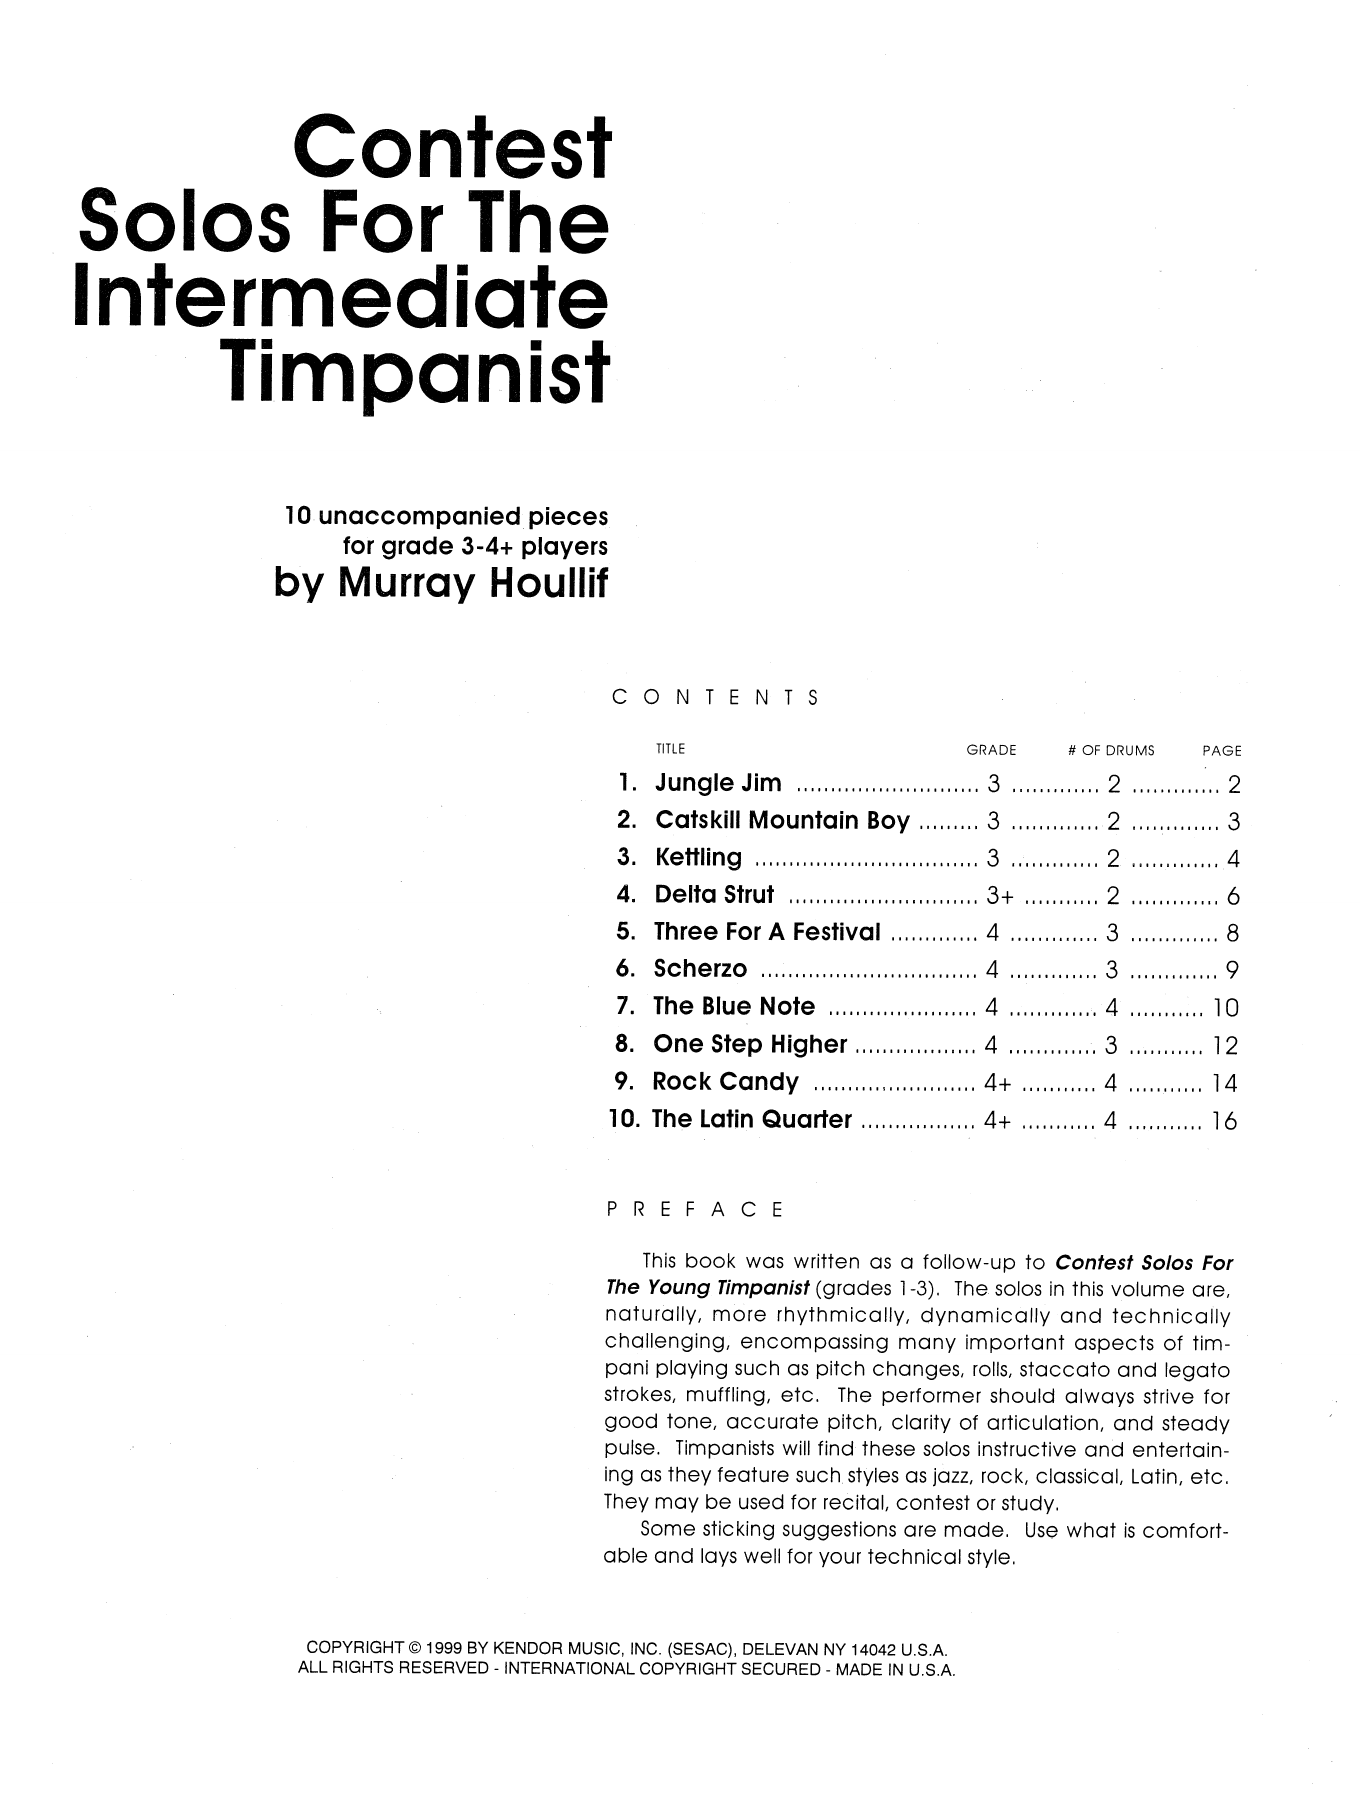 Download Murray Houllif Contest Solos For The Intermediate Timp Sheet Music